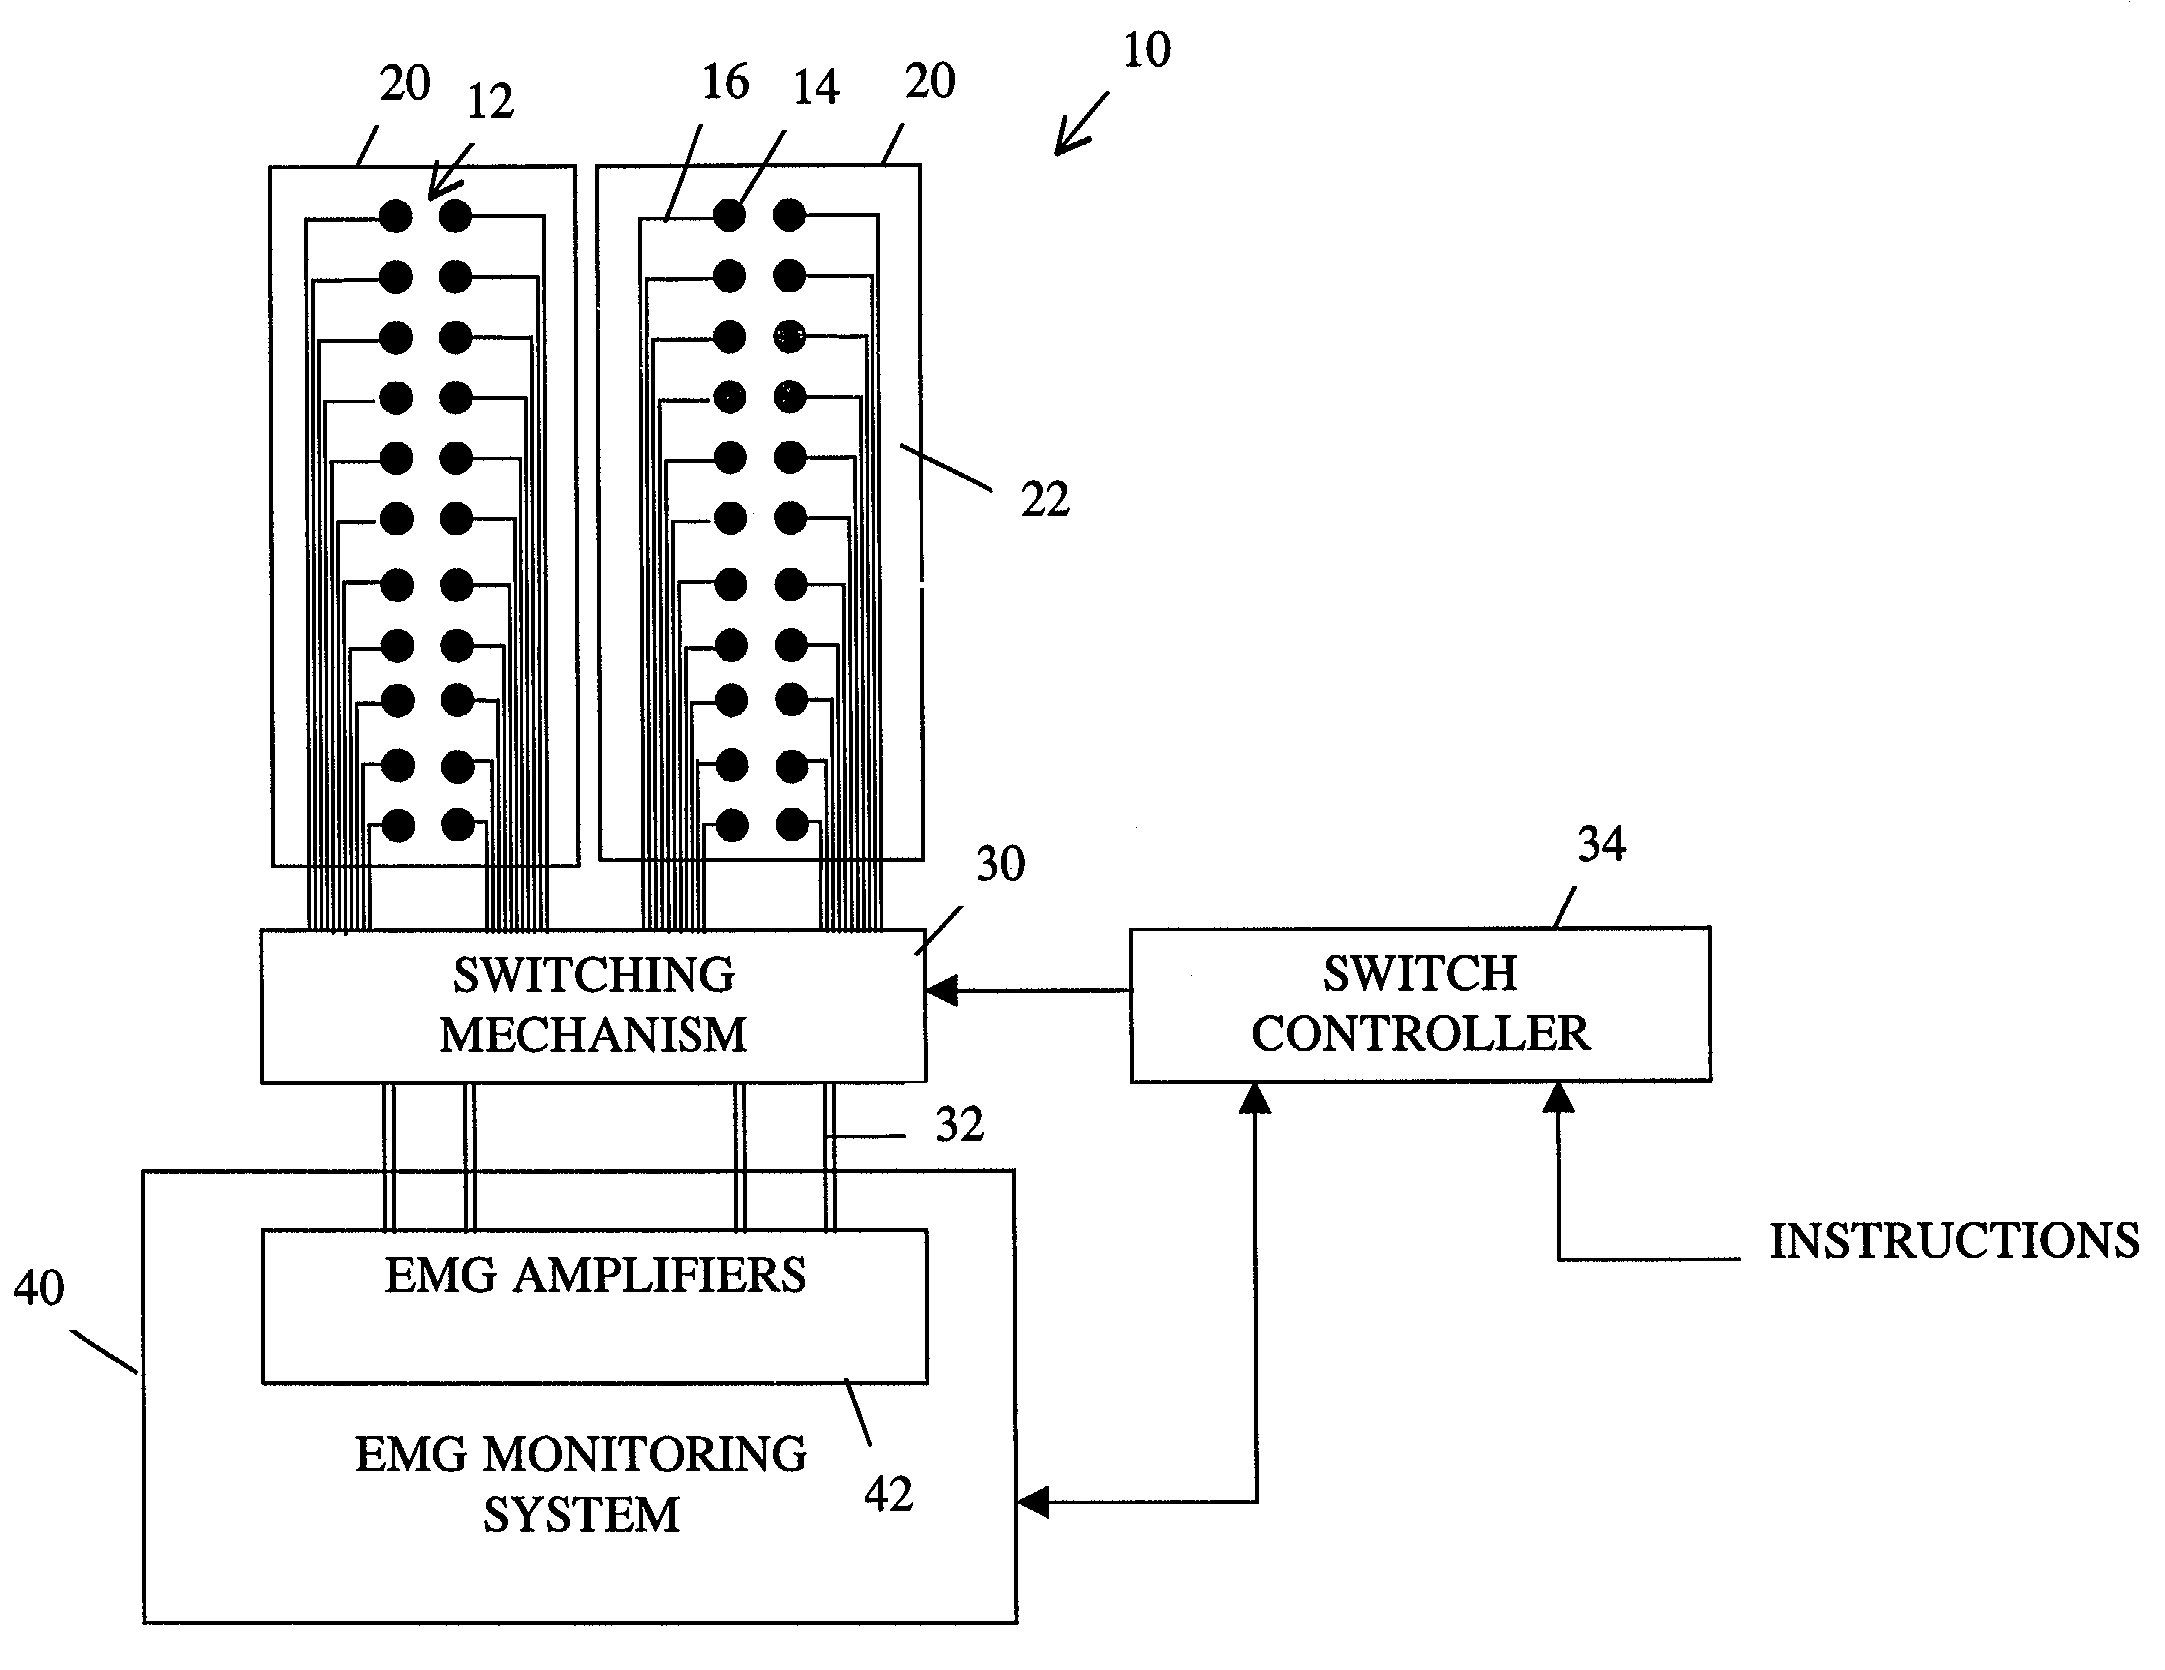 Apparatus for routing electromyography signals